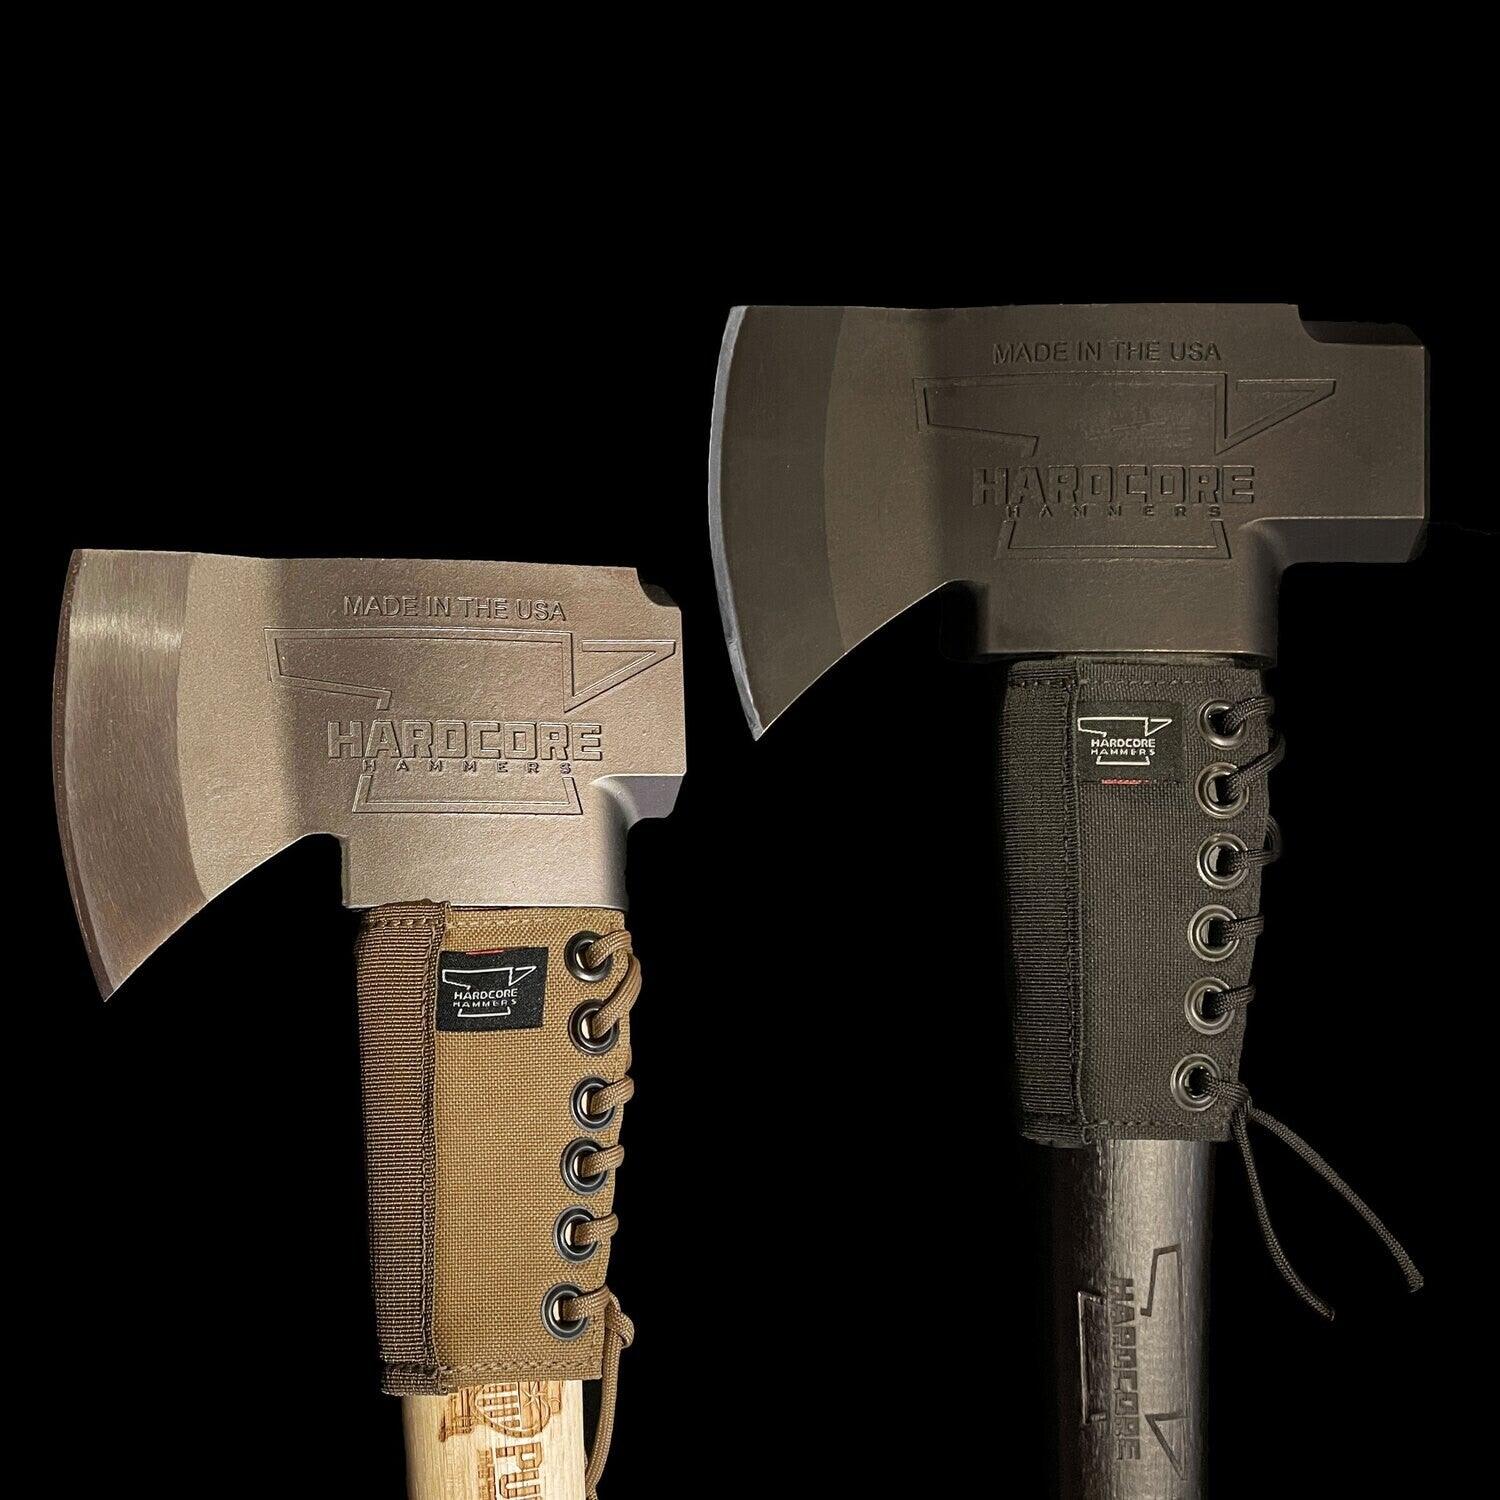 Hardcore Helve Protective Collar for Axes - Trusted Gear Company LLC